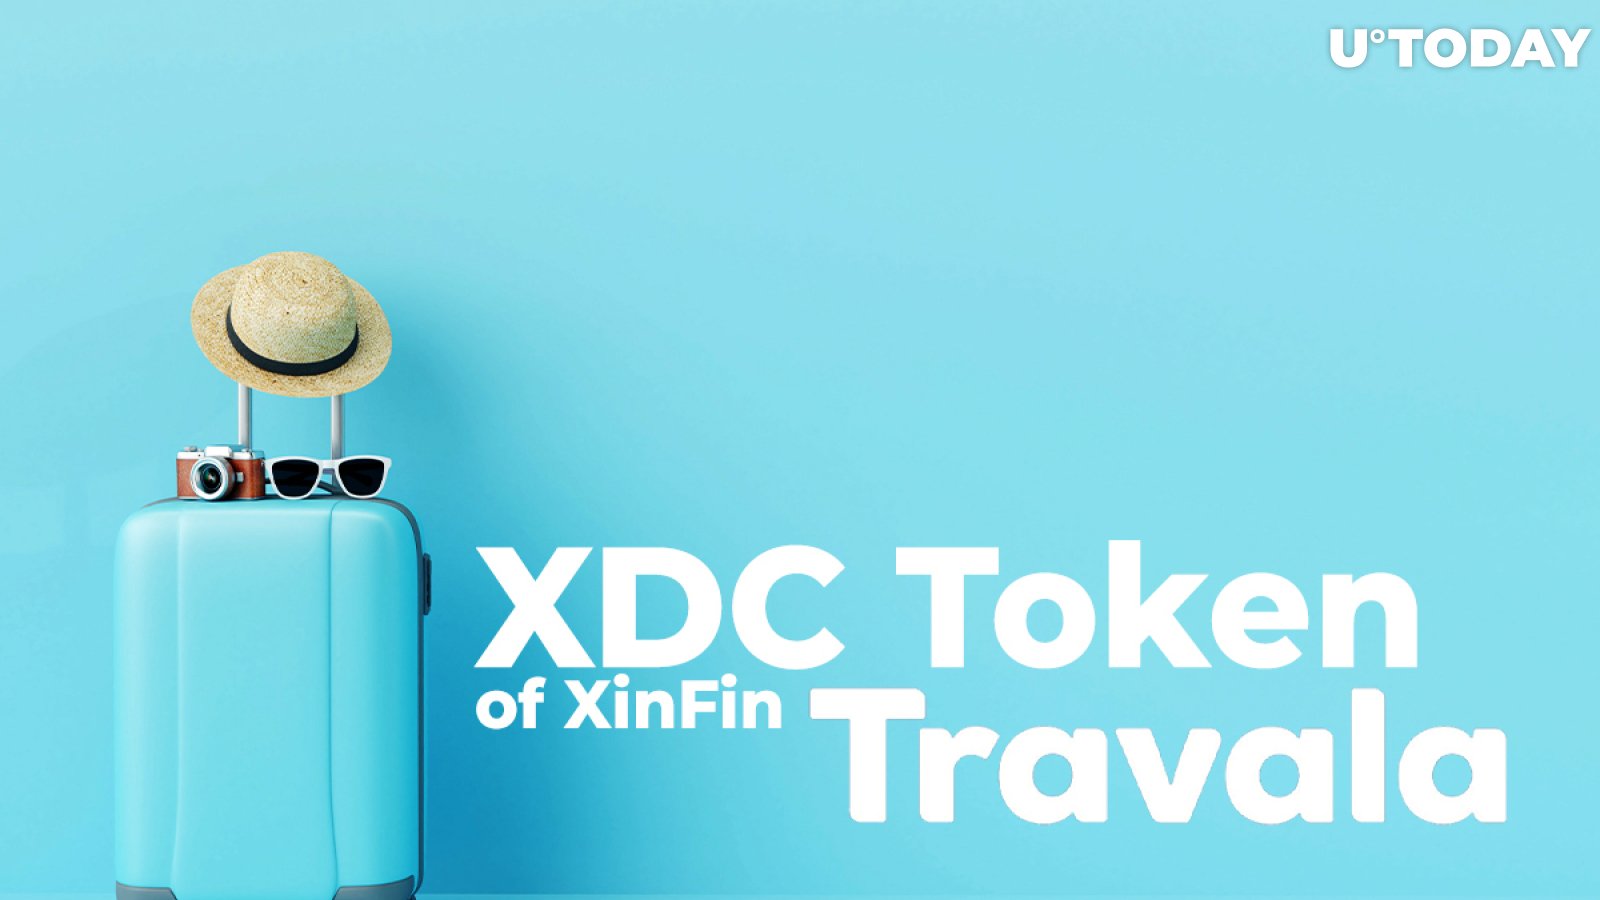 XDC Token of XinFin Now Accepted by First-Ever Crypto-Friendly Booking Platform Travala (AVA)